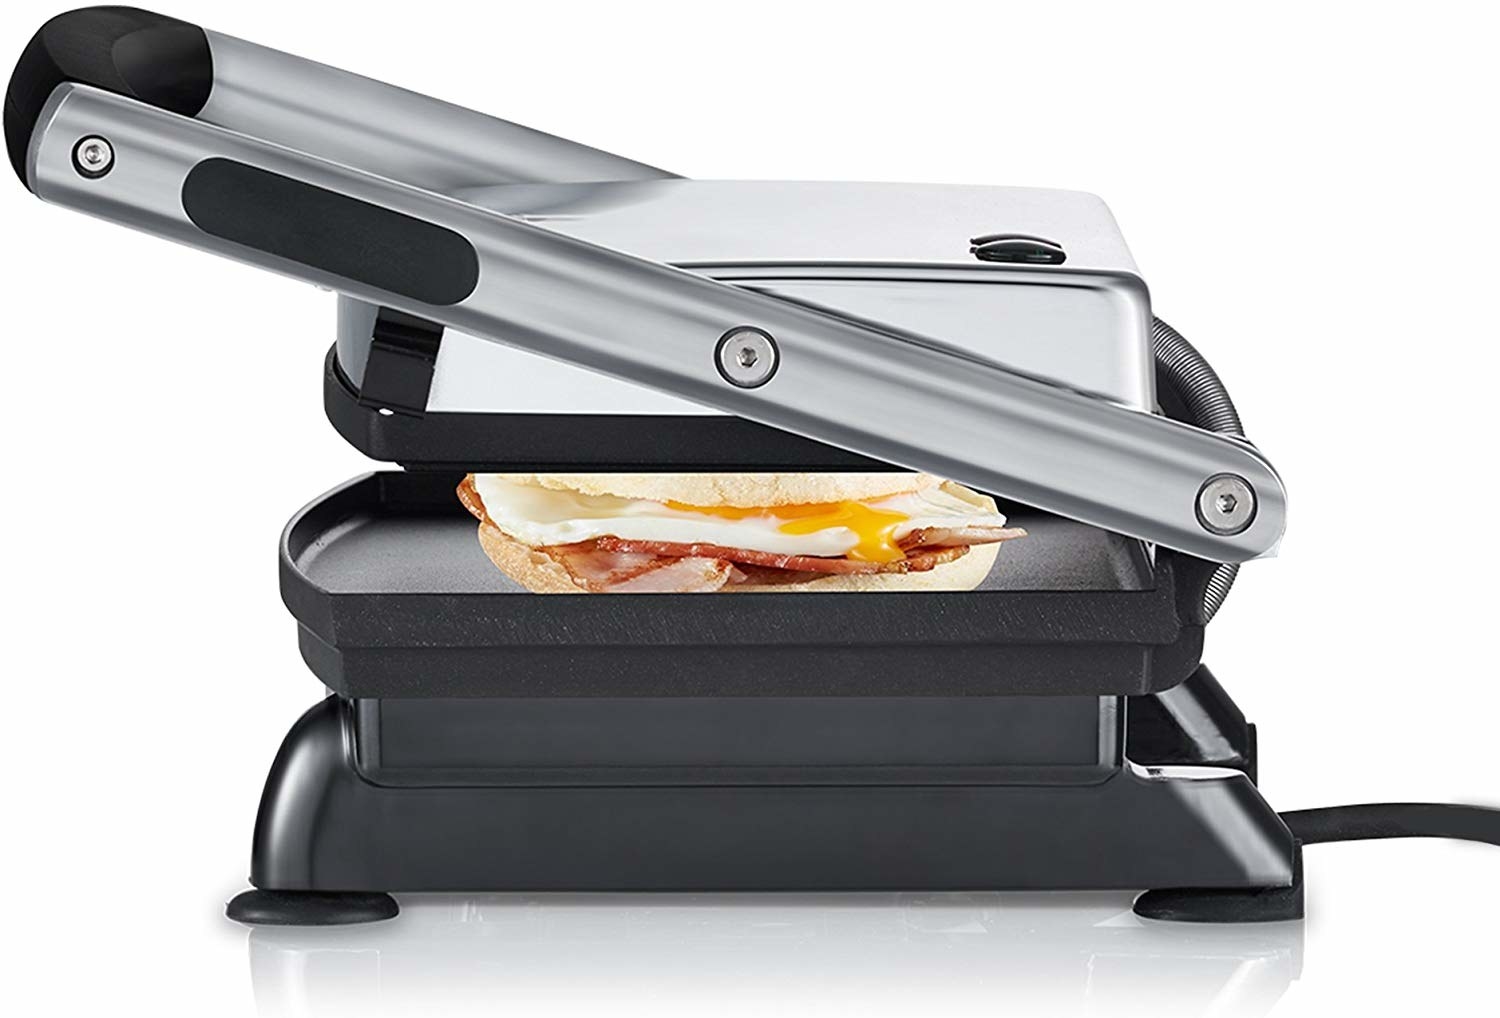 49 Super Useful Kitchen Products That'll Change Your Life For The Better